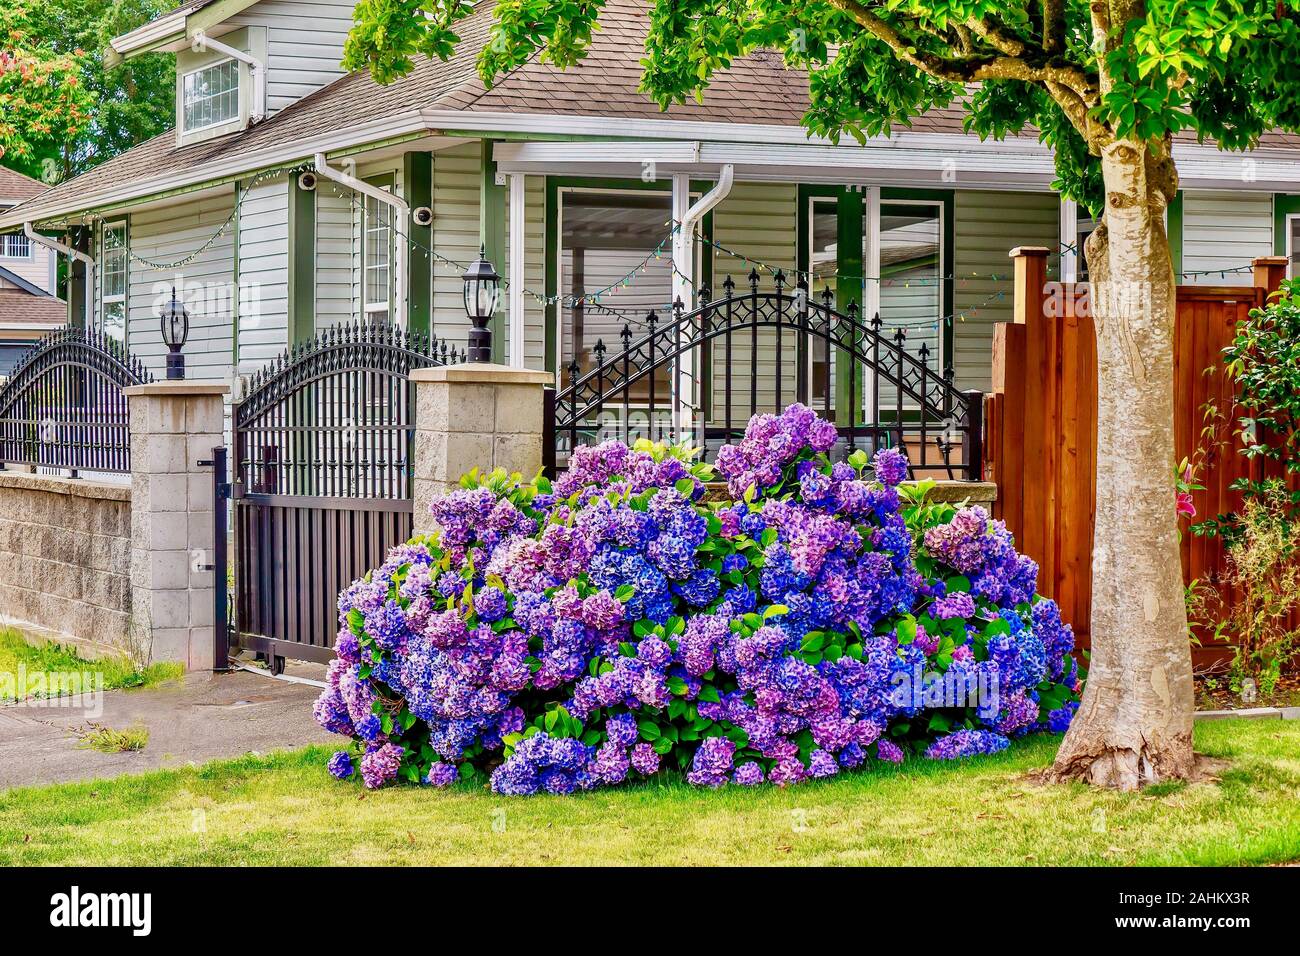 Street view of beautiful blue, purple, and pink hydrangea flowers blooming in a suburban neighborhood on a summer day, near Vancouver, Canada. Stock Photo